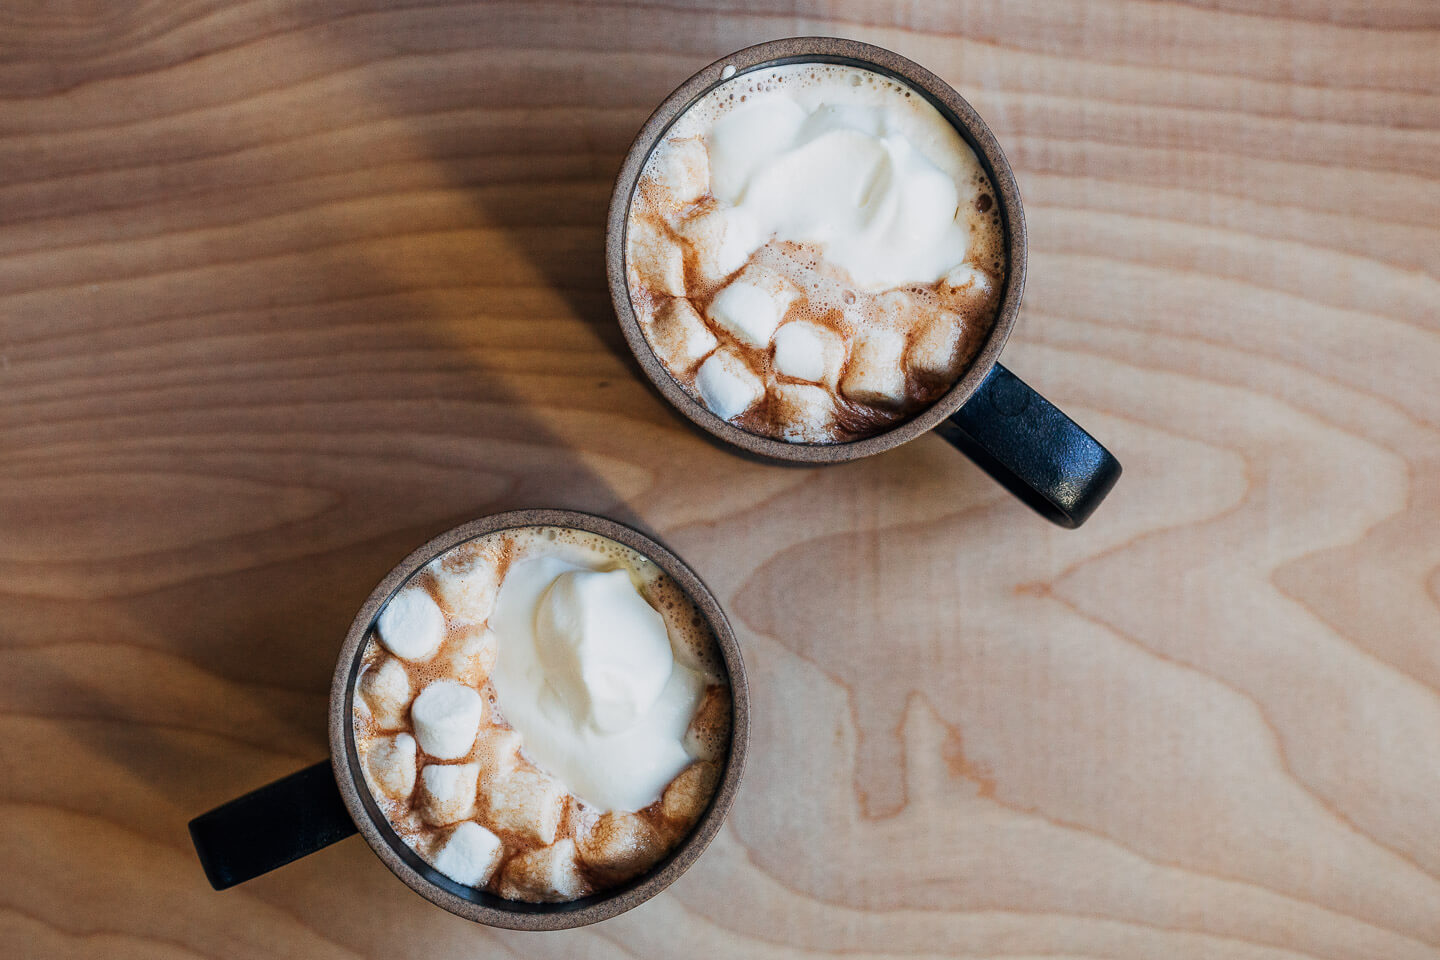 Two mugs of hot chocolate on a plain table. 